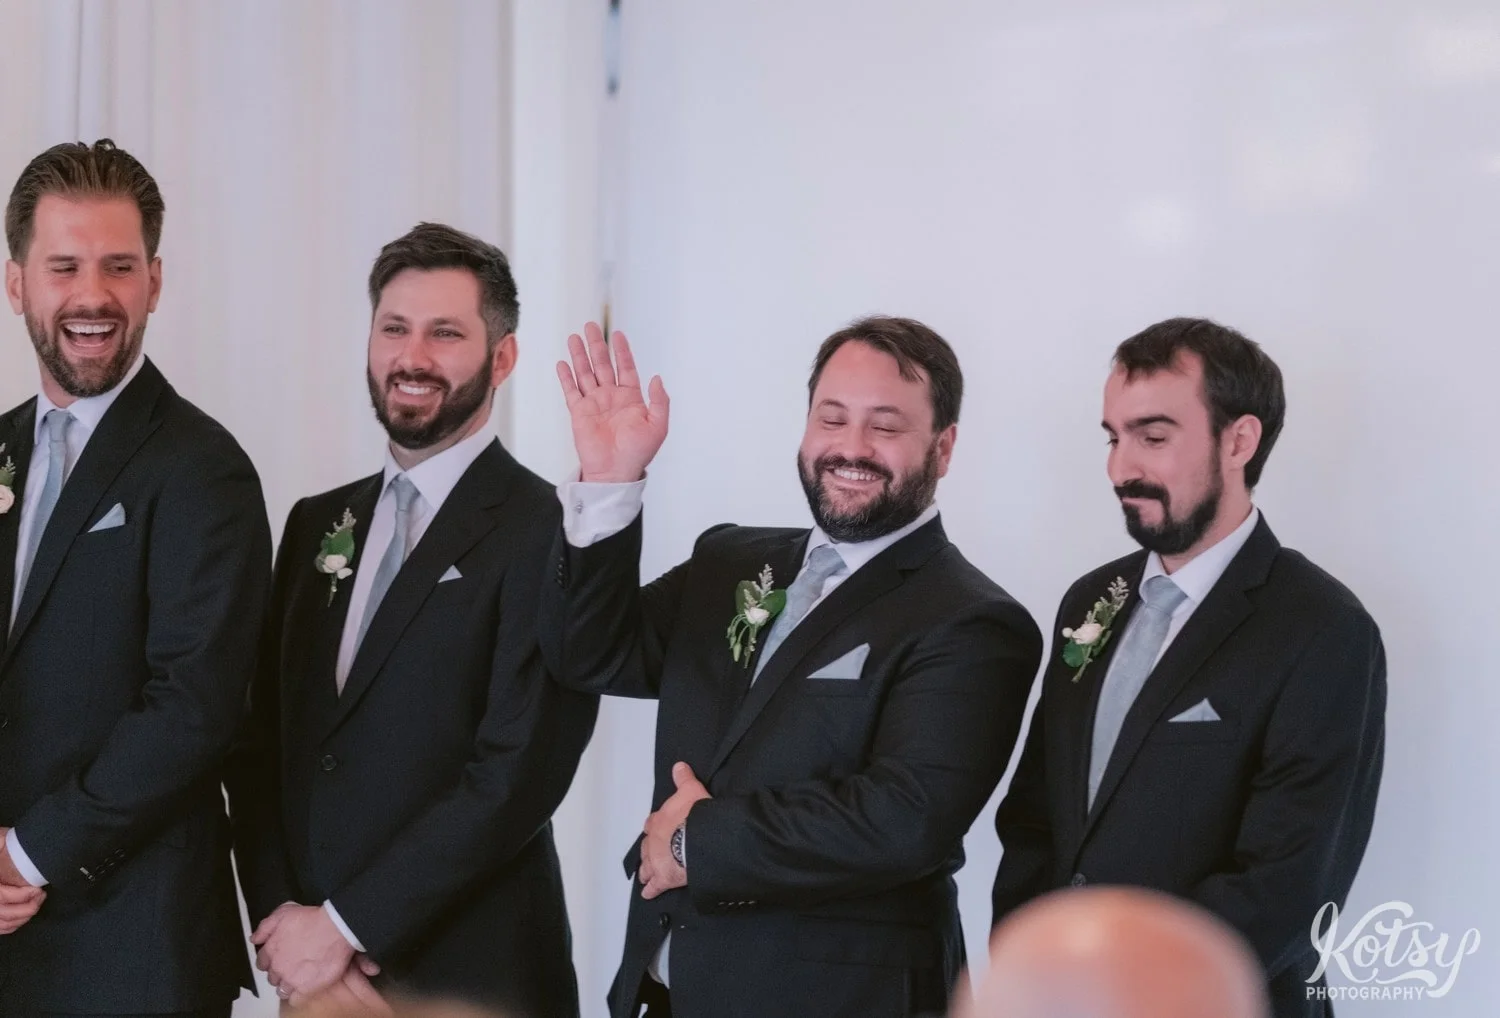 A groomsmen raises His hand and acknowledgement while he smiles during a Second Floor Events wedding ceremony in Toronto, Canada